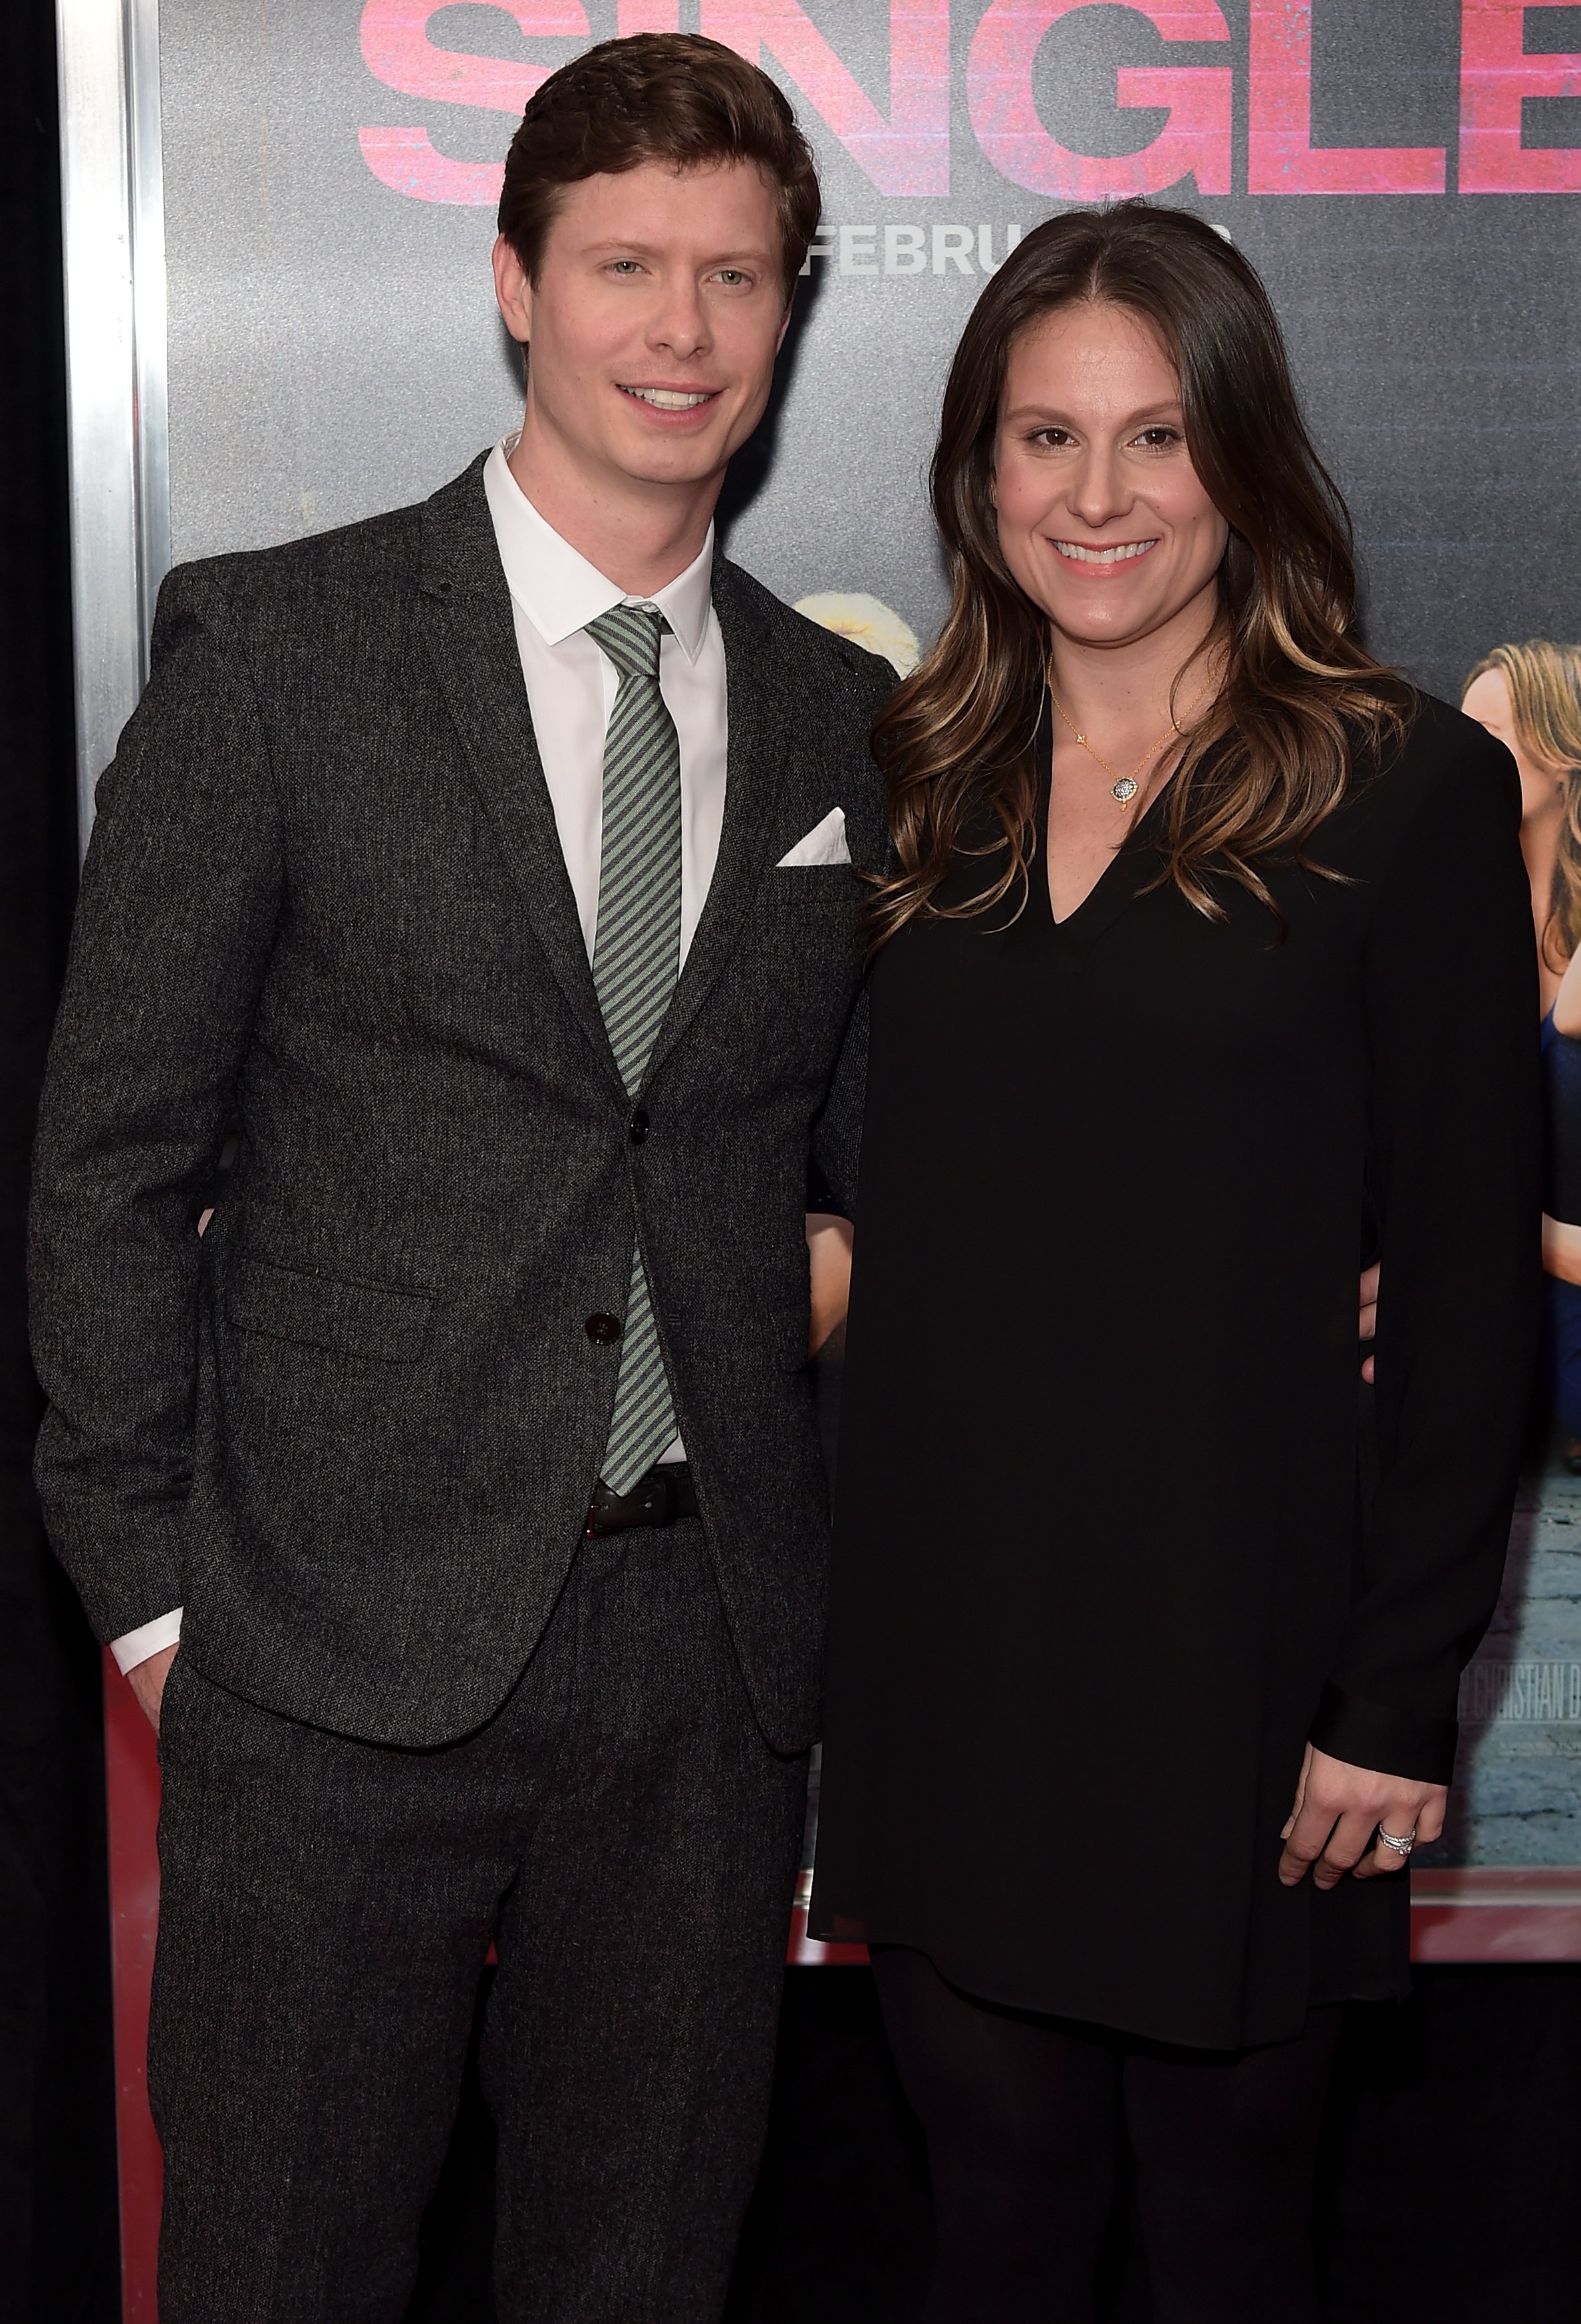 Married couple, Anders Holm and Emma Nesper during a "How To Be Single" premiere at the NYU Skirball Center in New York City on February 3, 2016. | Source: Getty Images